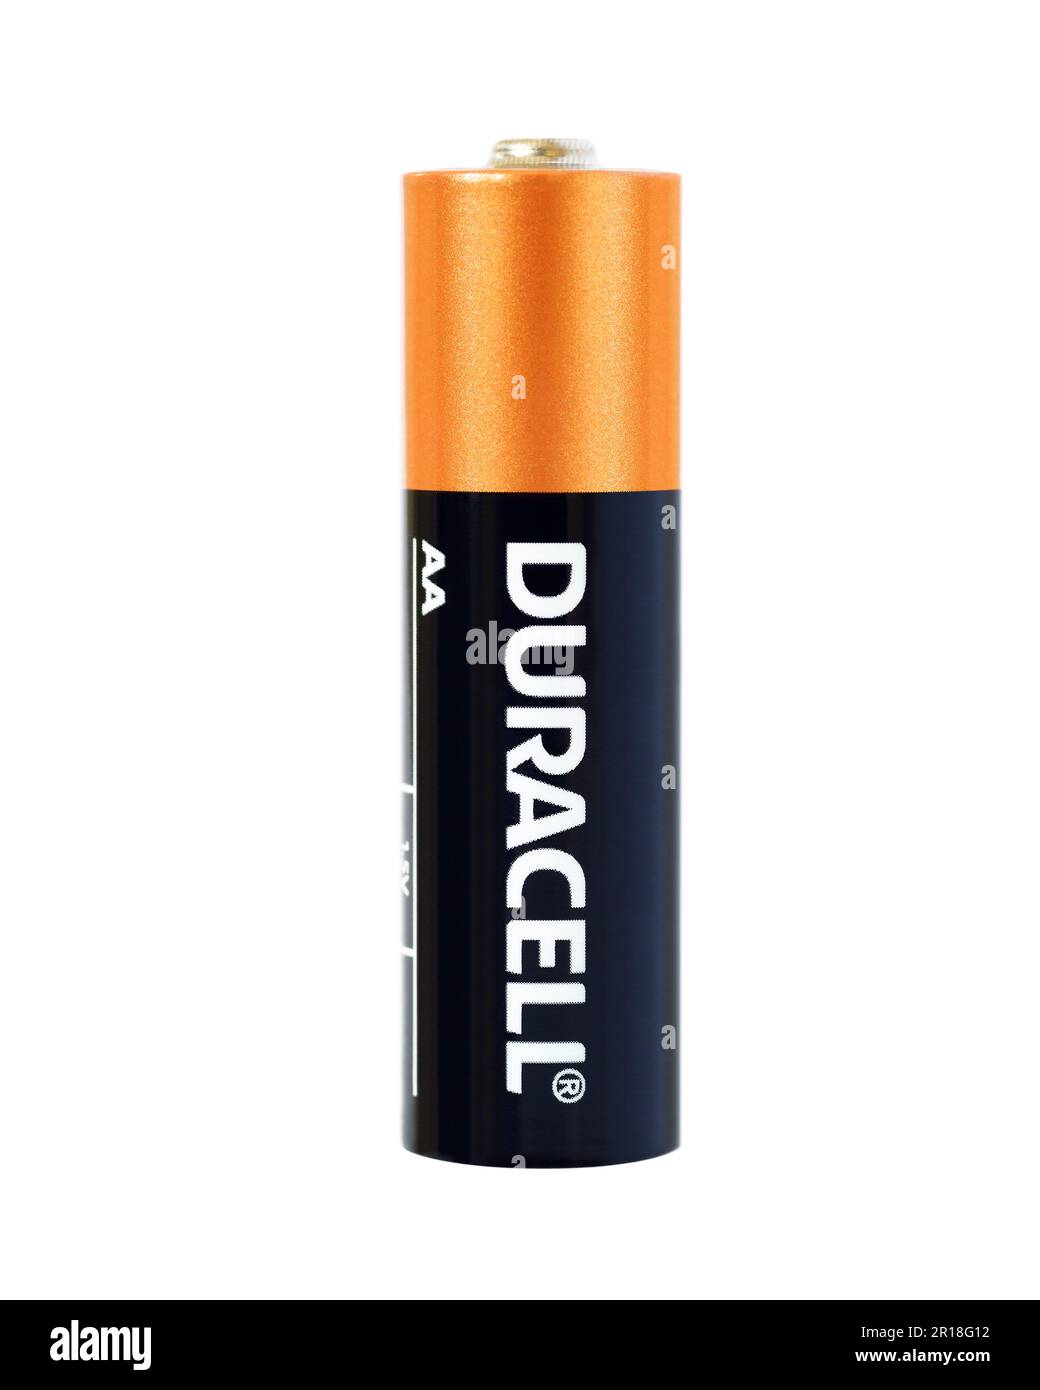 Pilas AA Duracell Coppertop con ingredientes Power Boost, paquete